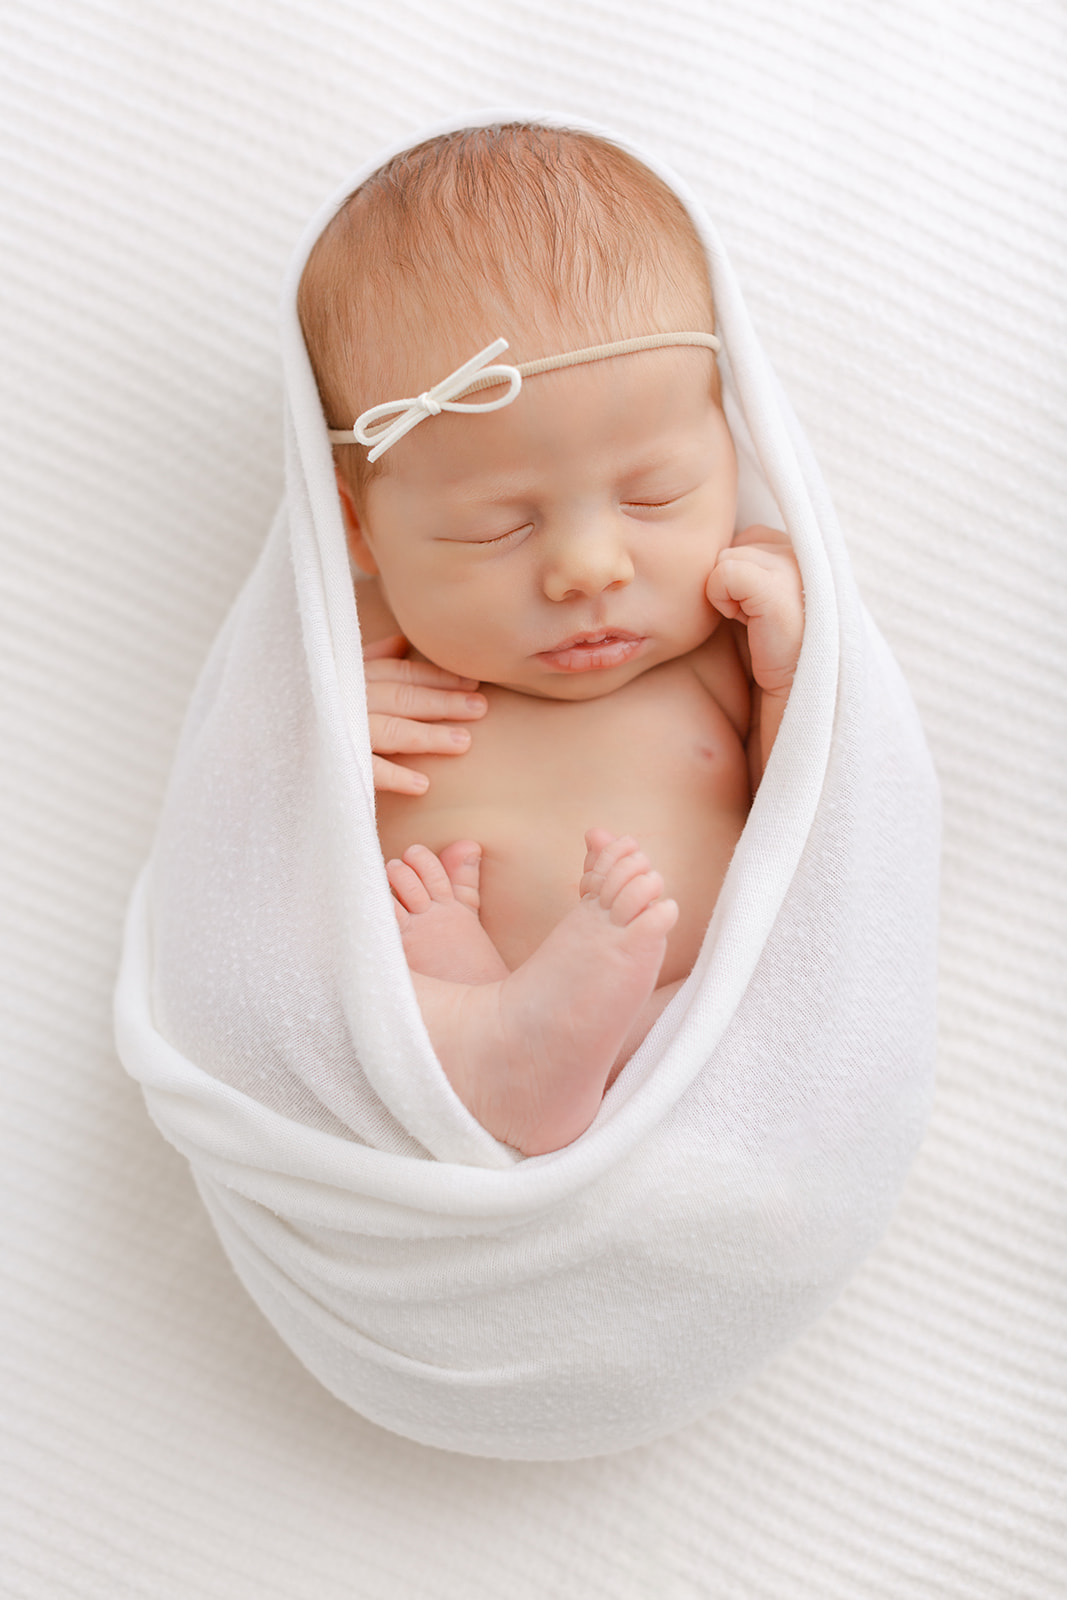 A newborn baby sleeps in an open white swaddle on a bed in a studio after Fertility Acupuncture Portland